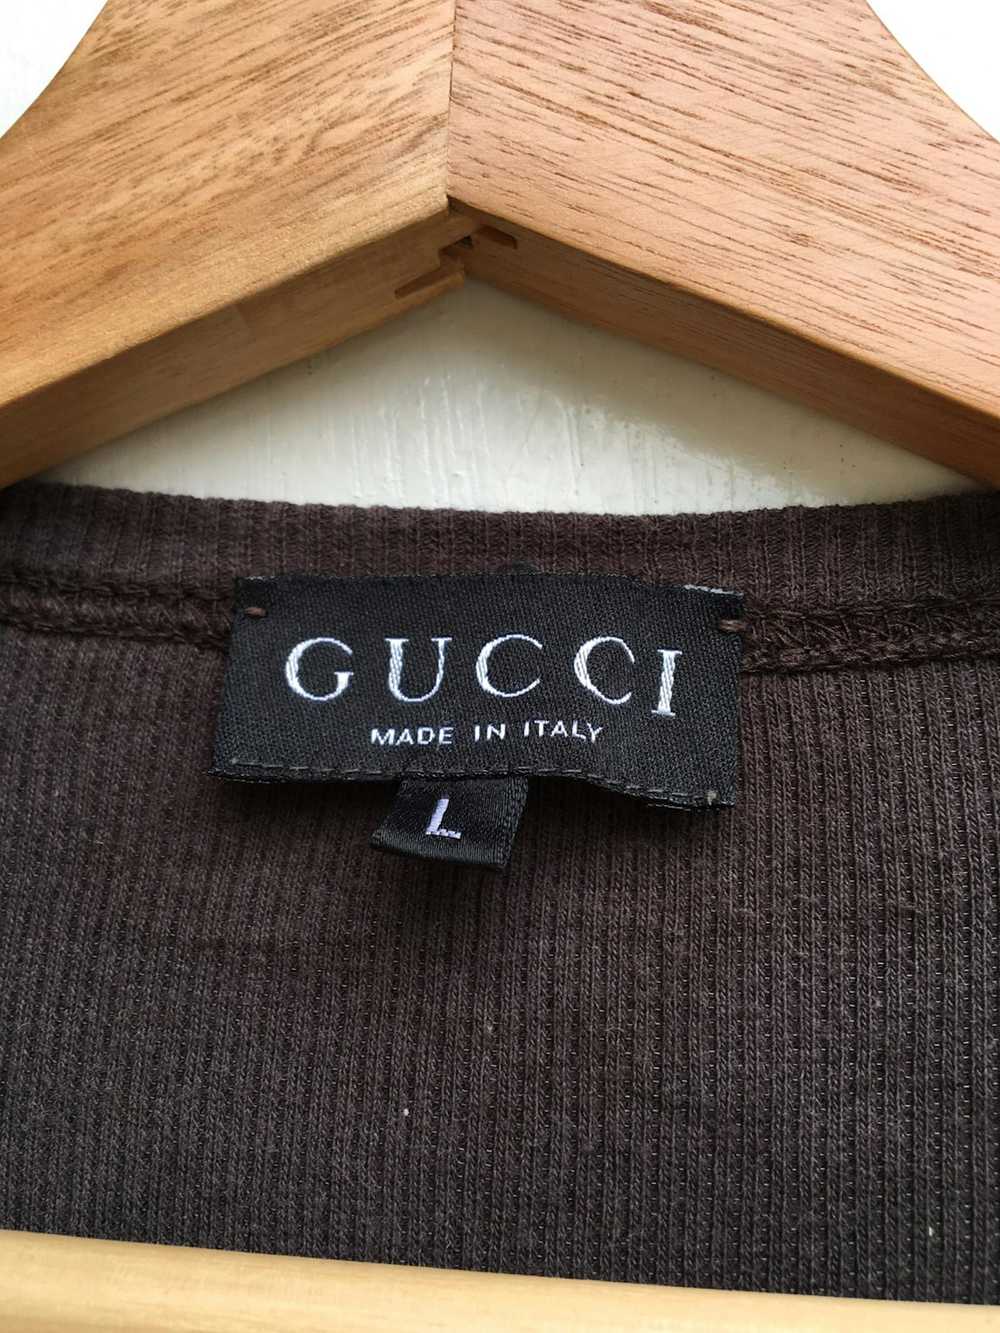 Gucci Vintage 90s Gucci Longsleeve Button Up Shirt - image 6